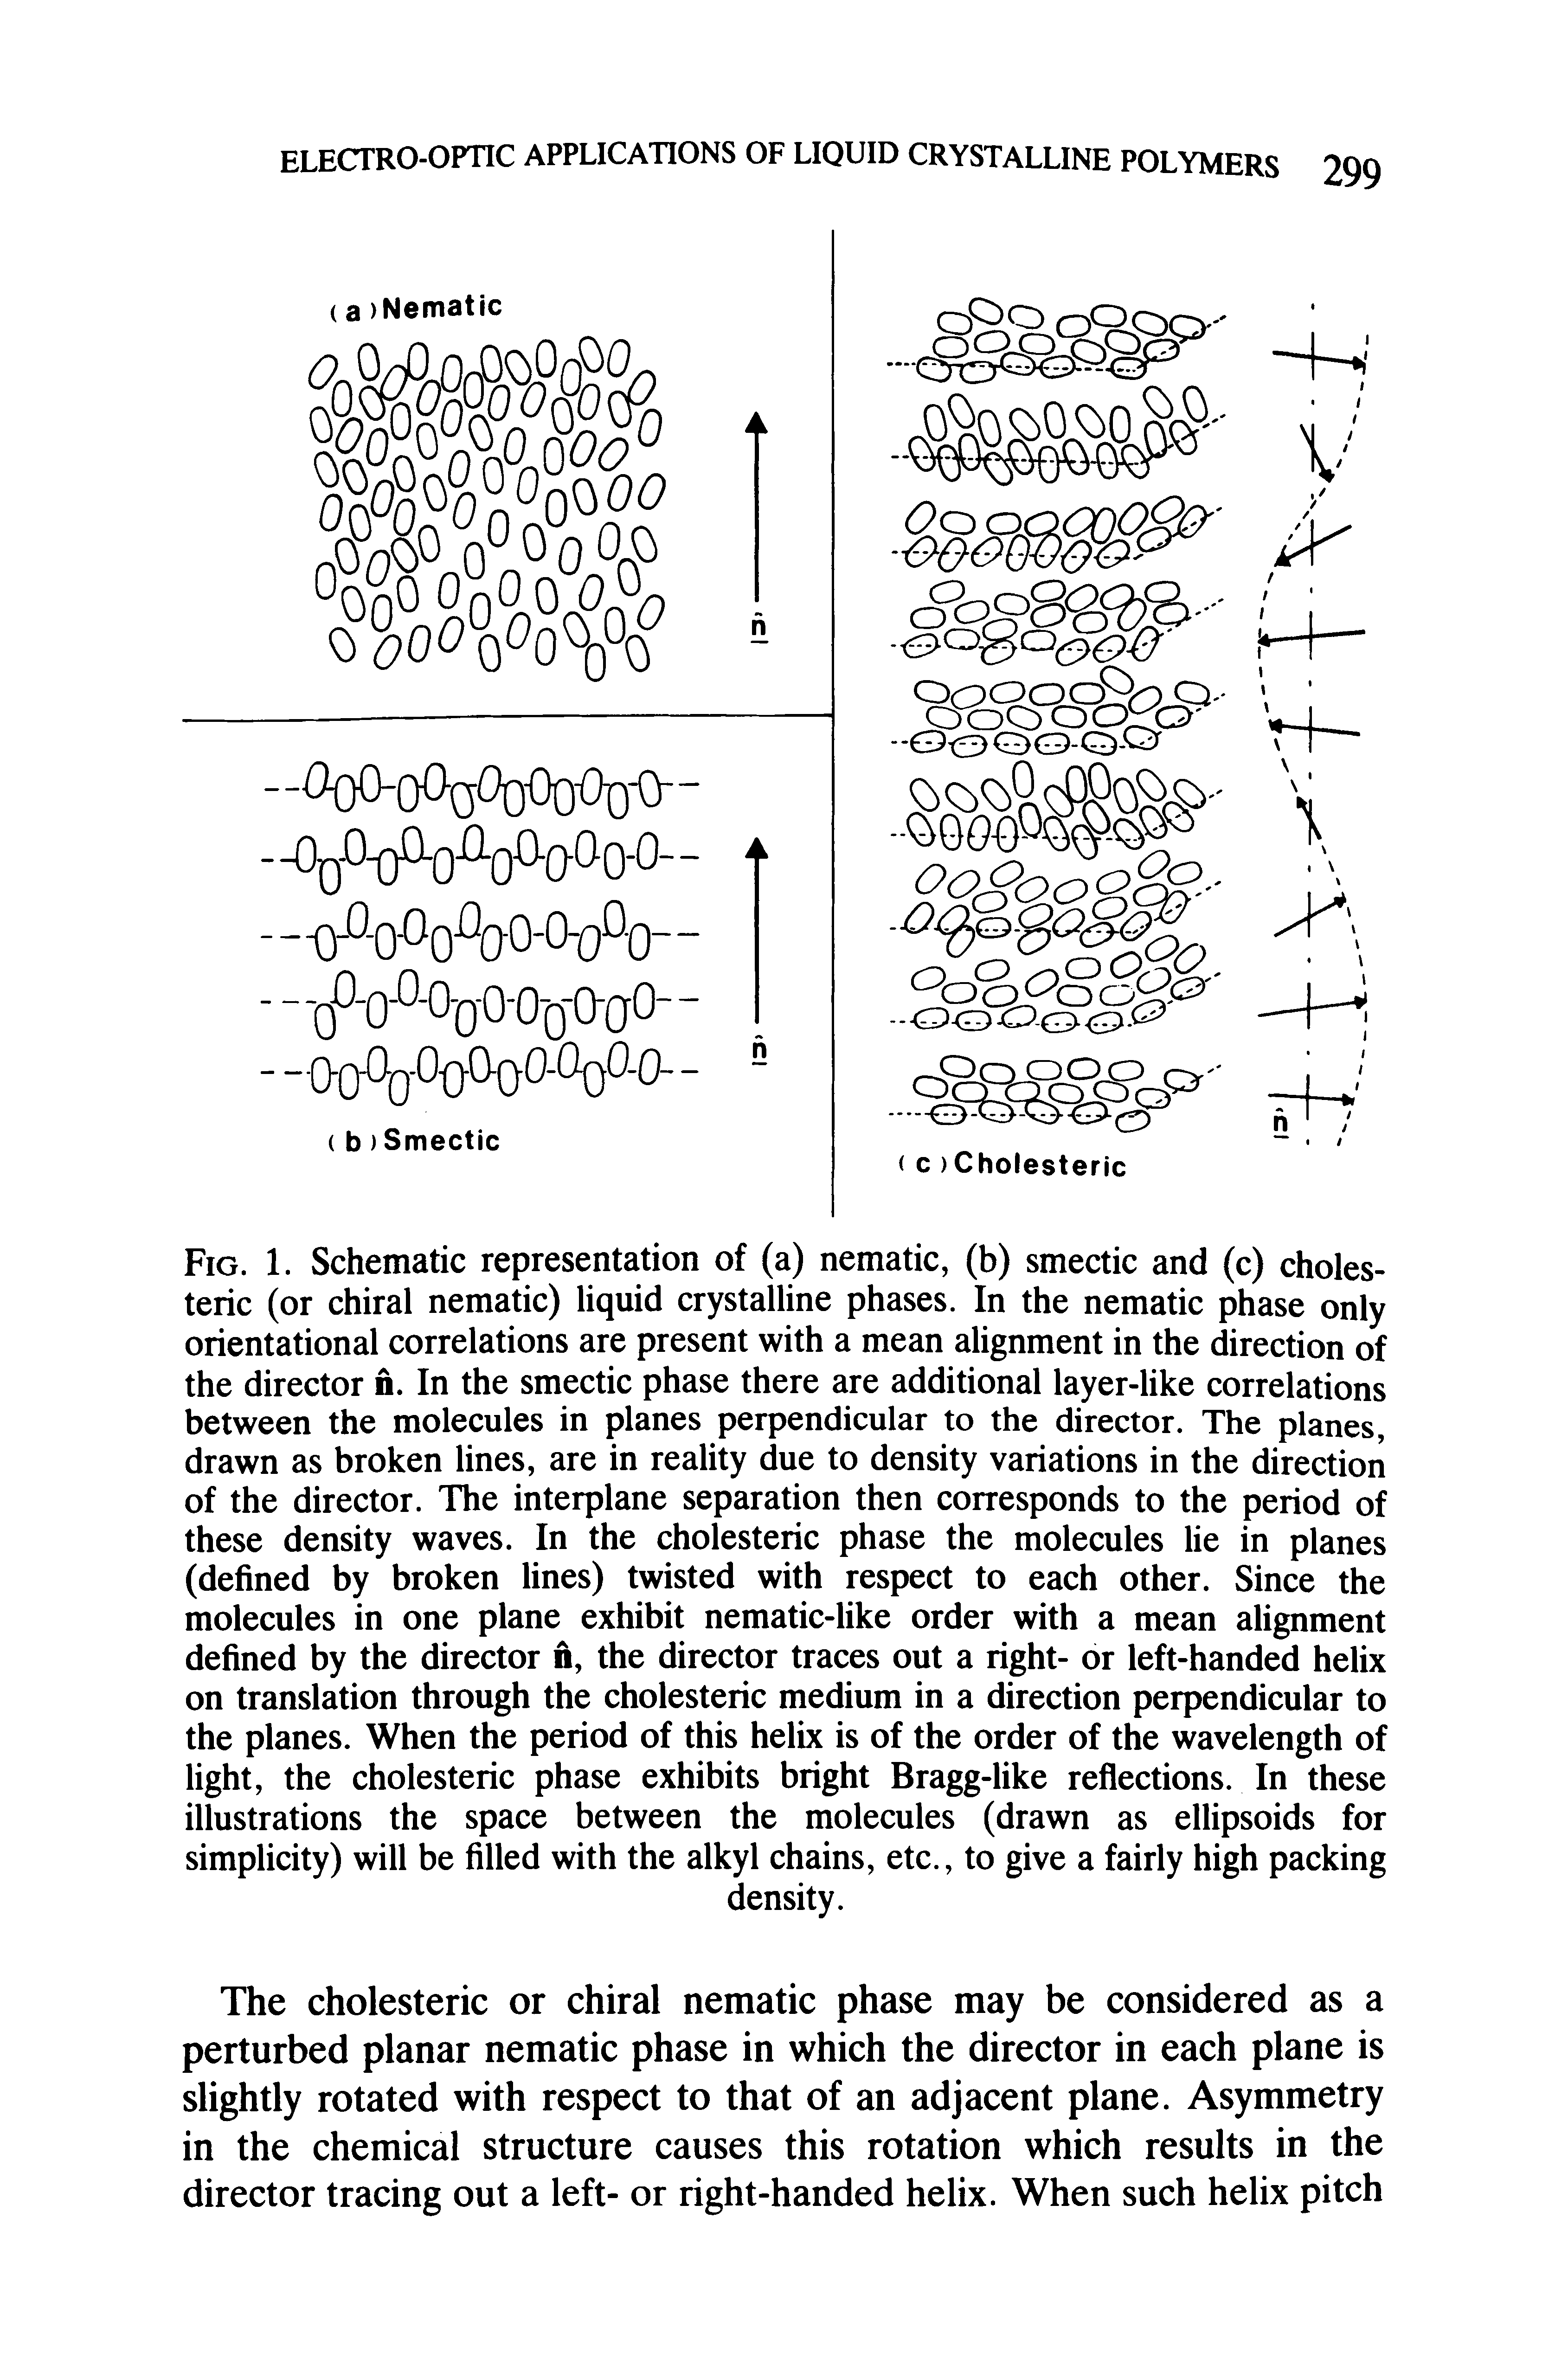 Fig. 1. Schematic representation of (a) nematic, (b) smectic and (c) cholesteric (or chiral nematic) liquid crystalline phases. In the nematic phase only orientational correlations are present with a mean alignment in the direction of the director n. In the smectic phase there are additional layer-like correlations between the molecules in planes perpendicular to the director. The planes, drawn as broken lines, are in reality due to density variations in the direction of the director. The interplane separation then corresponds to the period of these density waves. In the cholesteric phase the molecules lie in planes (defined by broken lines) twisted with respect to each other. Since the molecules in one plane exhibit nematic-like order with a mean alignment defined by the director n, the director traces out a right- or left-handed helix on translation through the cholesteric medium in a direction perpendicular to the planes. When the period of this helix is of the order of the wavelength of light, the cholesteric phase exhibits bright Bragg-like reflections. In these illustrations the space between the molecules (drawn as ellipsoids for simplicity) will be filled with the alkyl chains, etc., to give a fairly high packing...